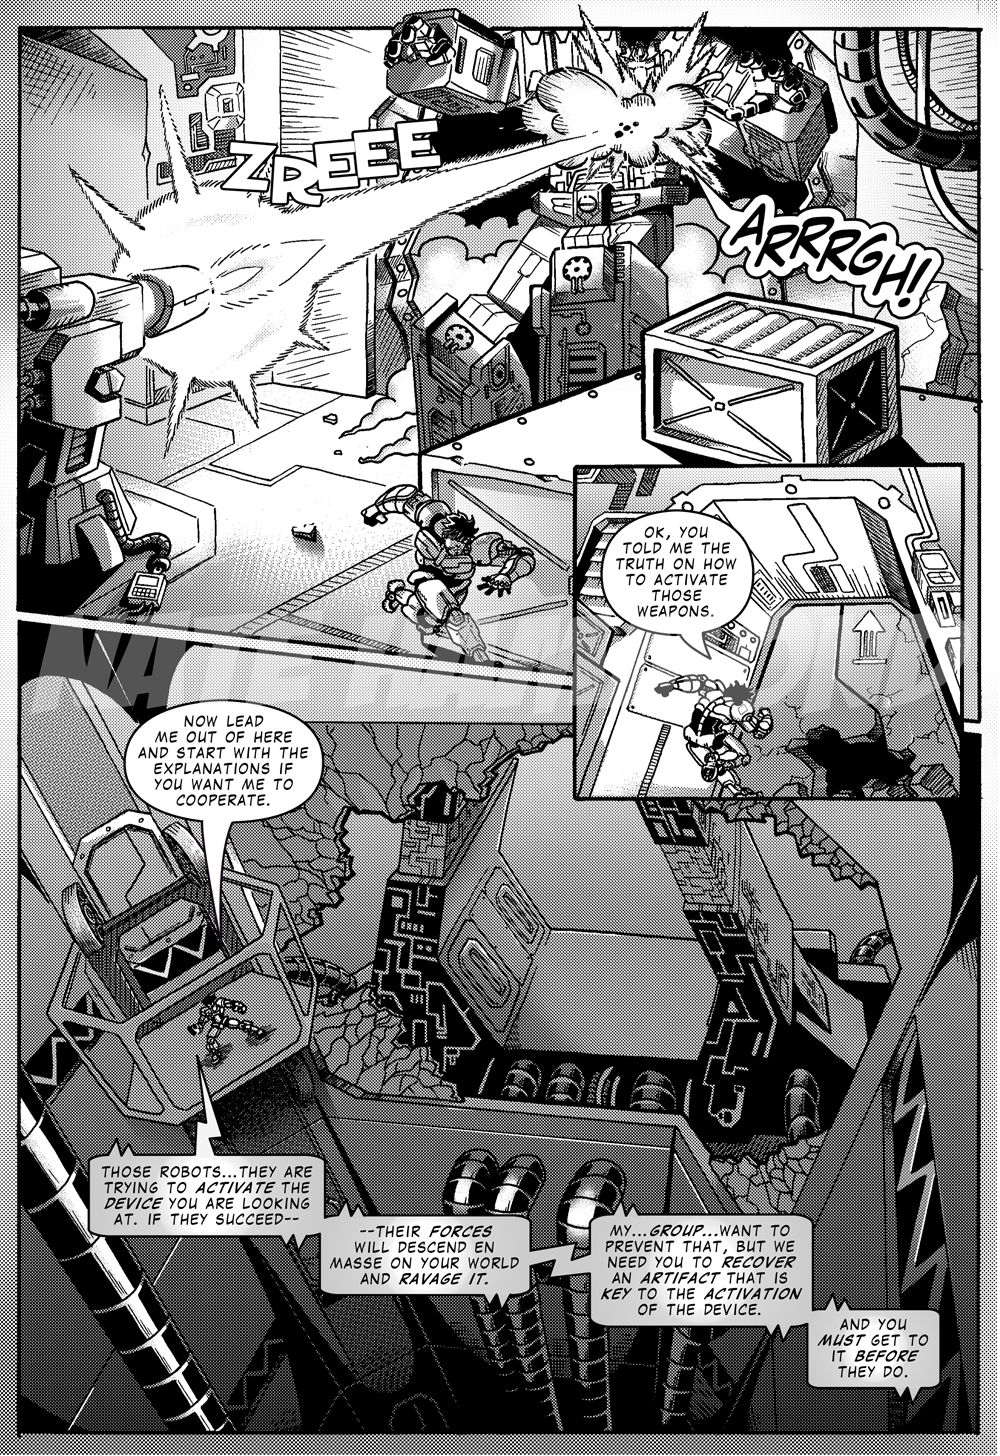 WARBOTRON issue 3, page 8